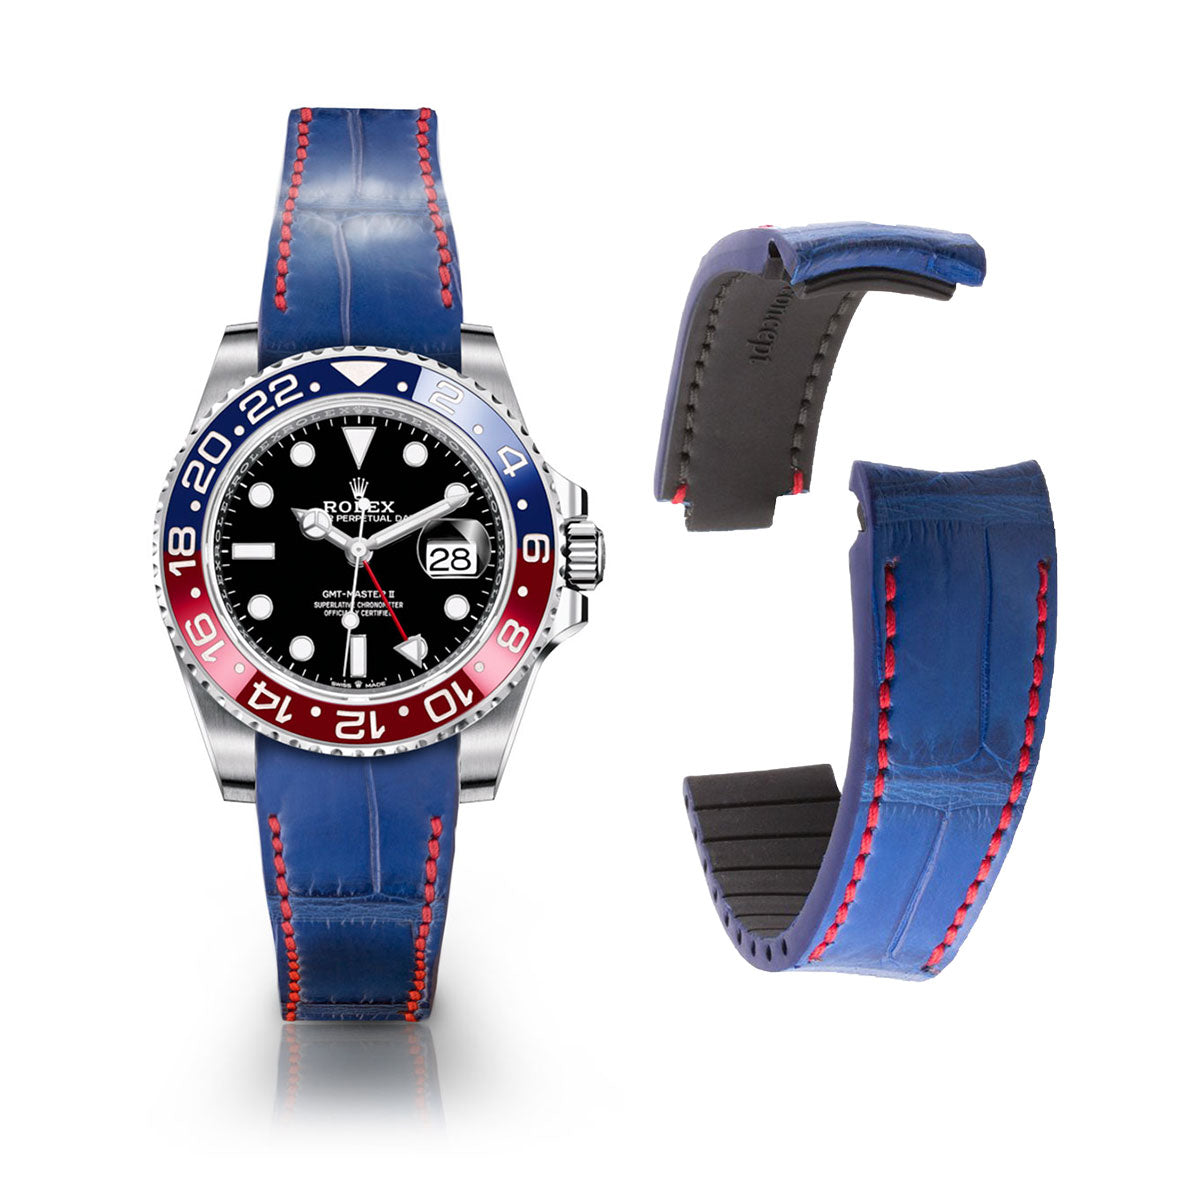 Rolex - R Strap leather " Special editions" - alligator Black brown, blue – ABP Concept